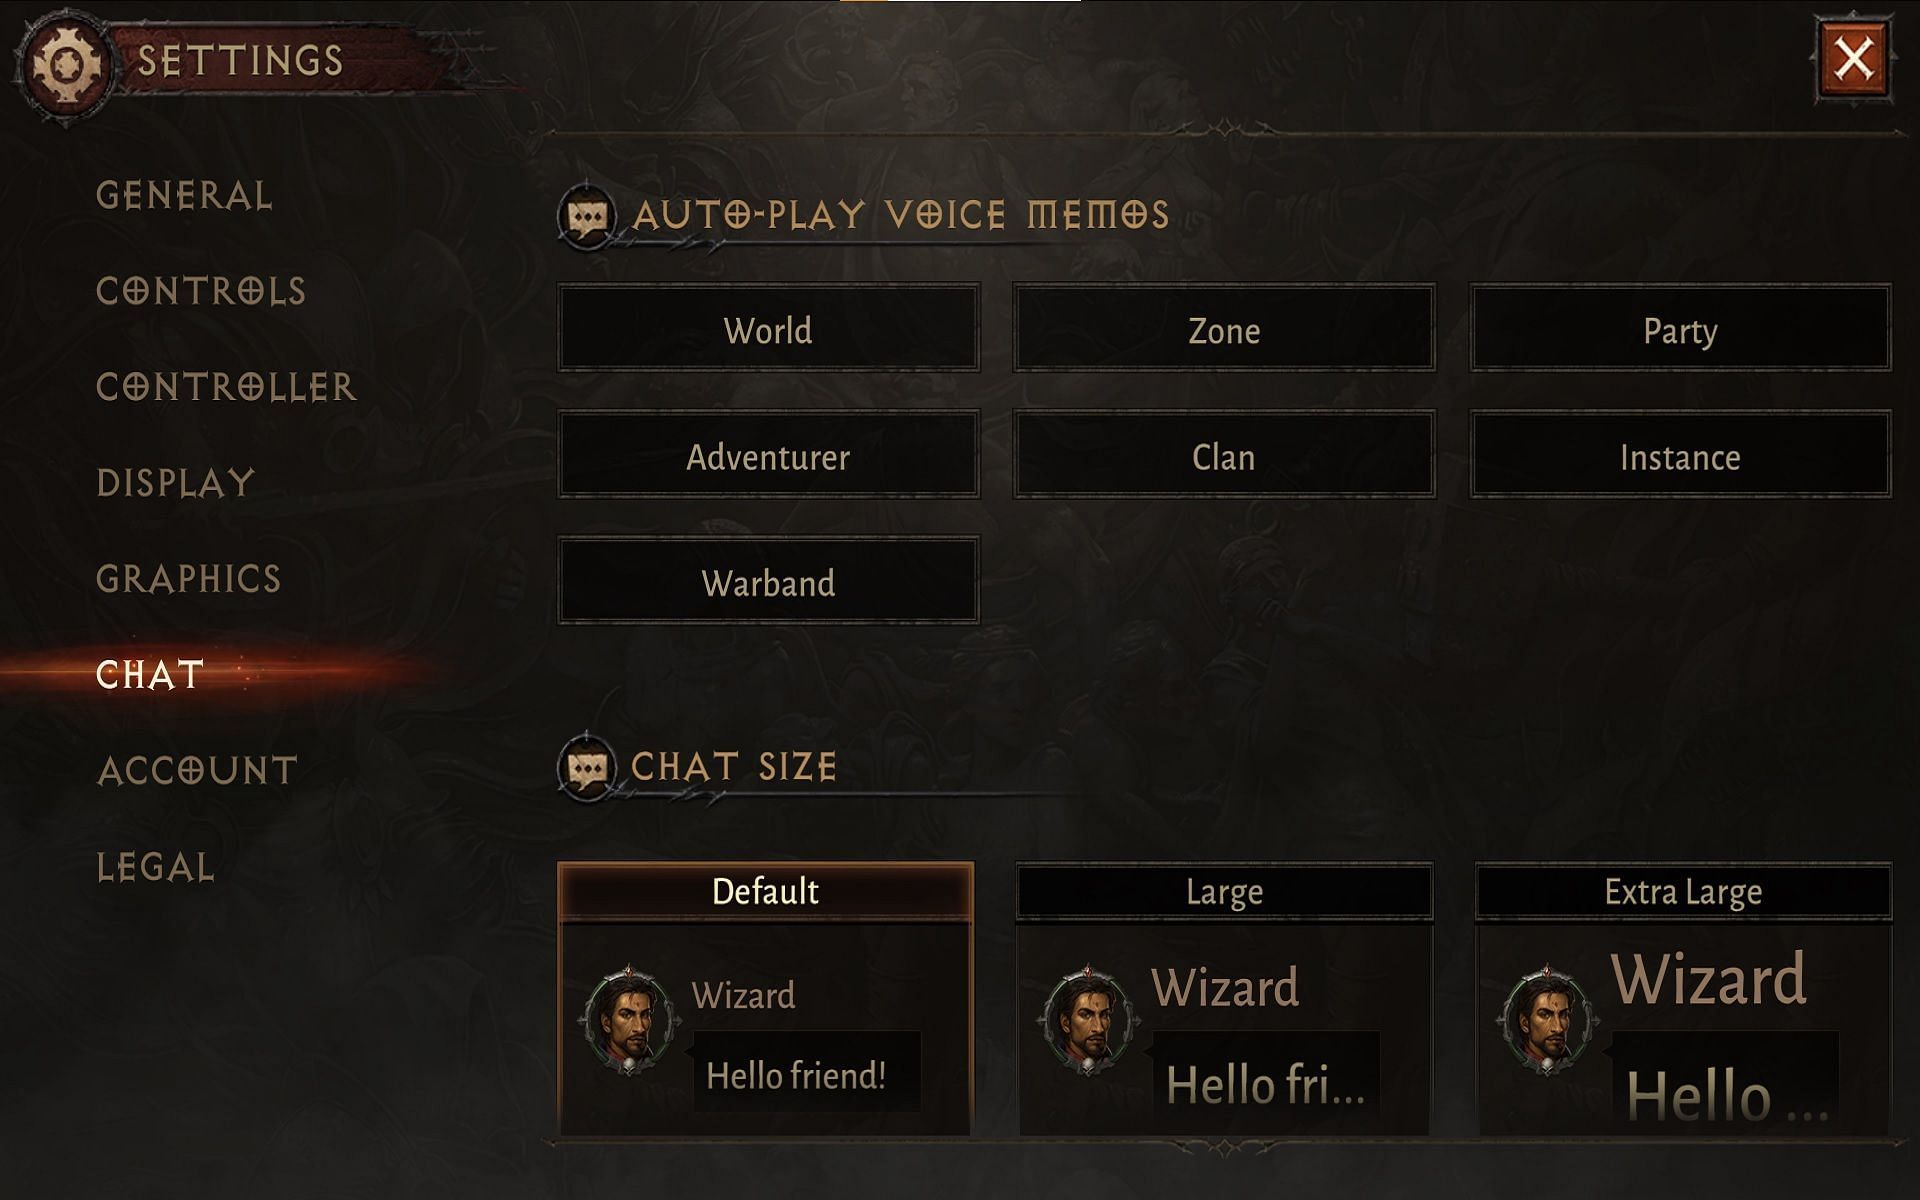 Several accessibility features in the settings (Image via Activision Blizzard)